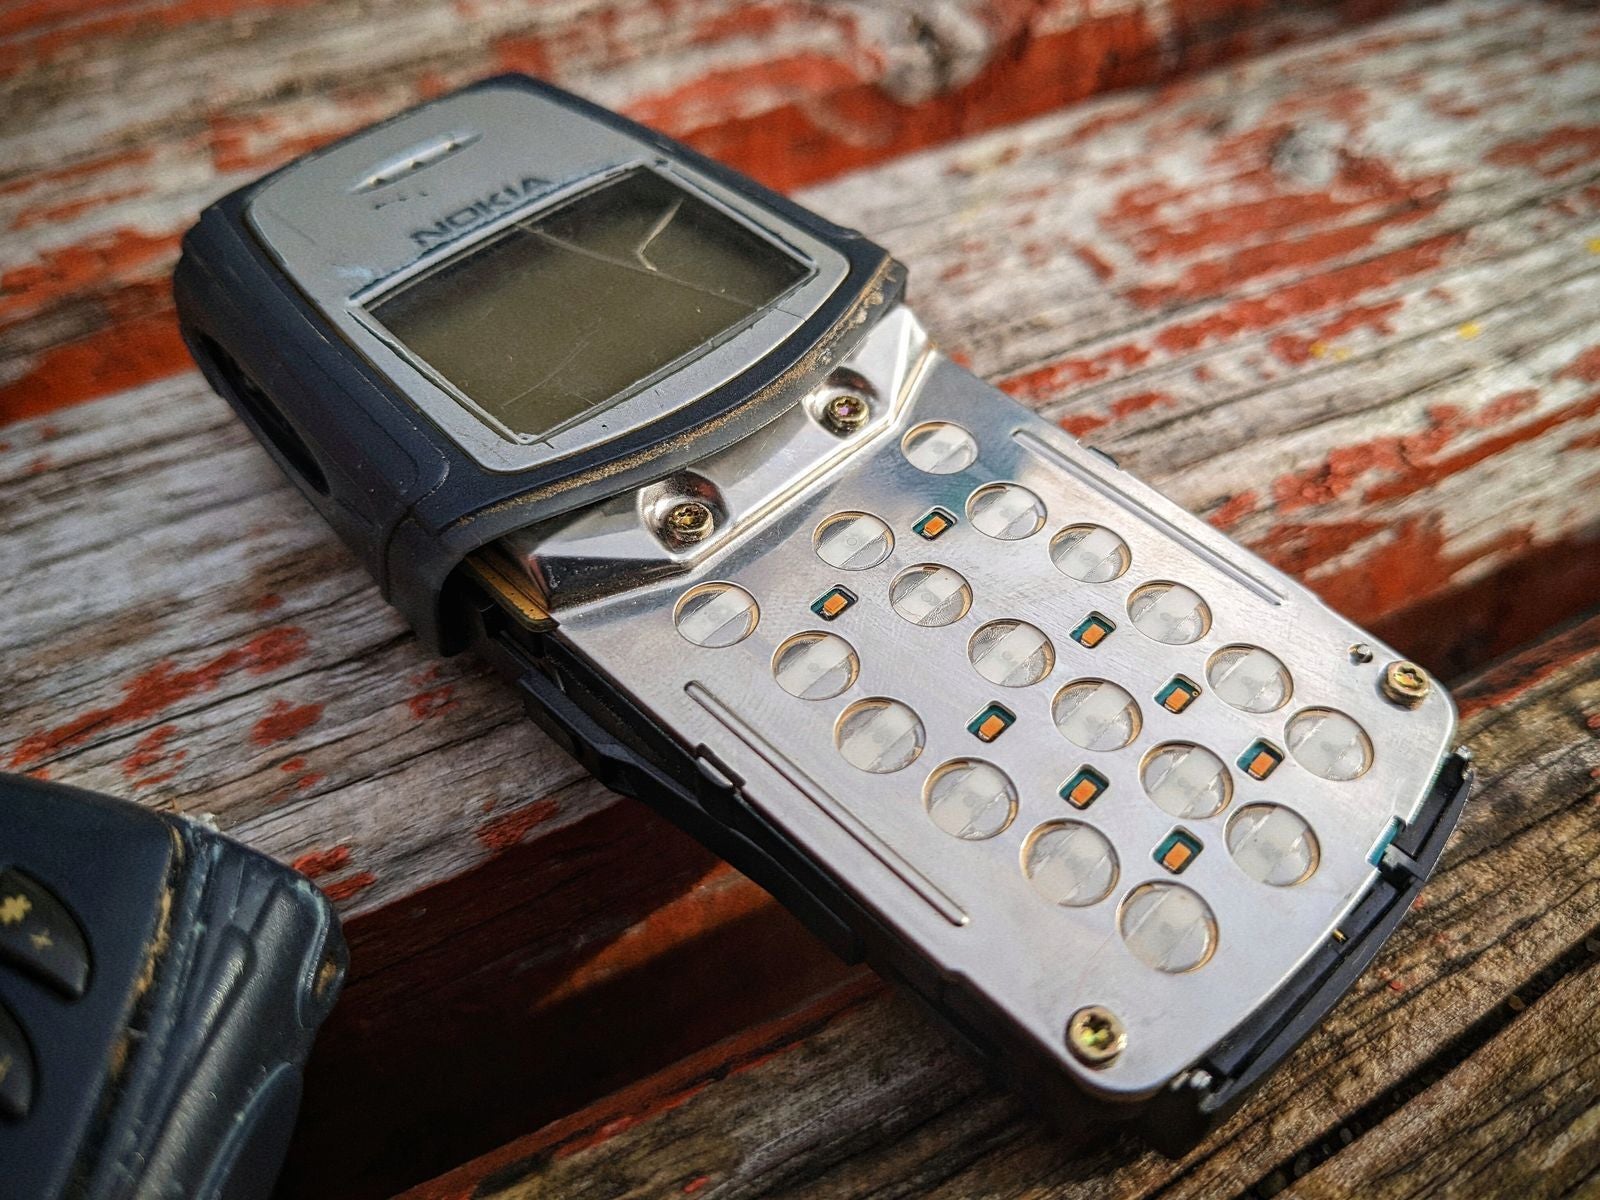 Taking the shell off was as easy as a squeeze, but despite that it didn't fall off on its own. - Nokia 3310 might have been indestructible, but my 5210 beat it by a long shot